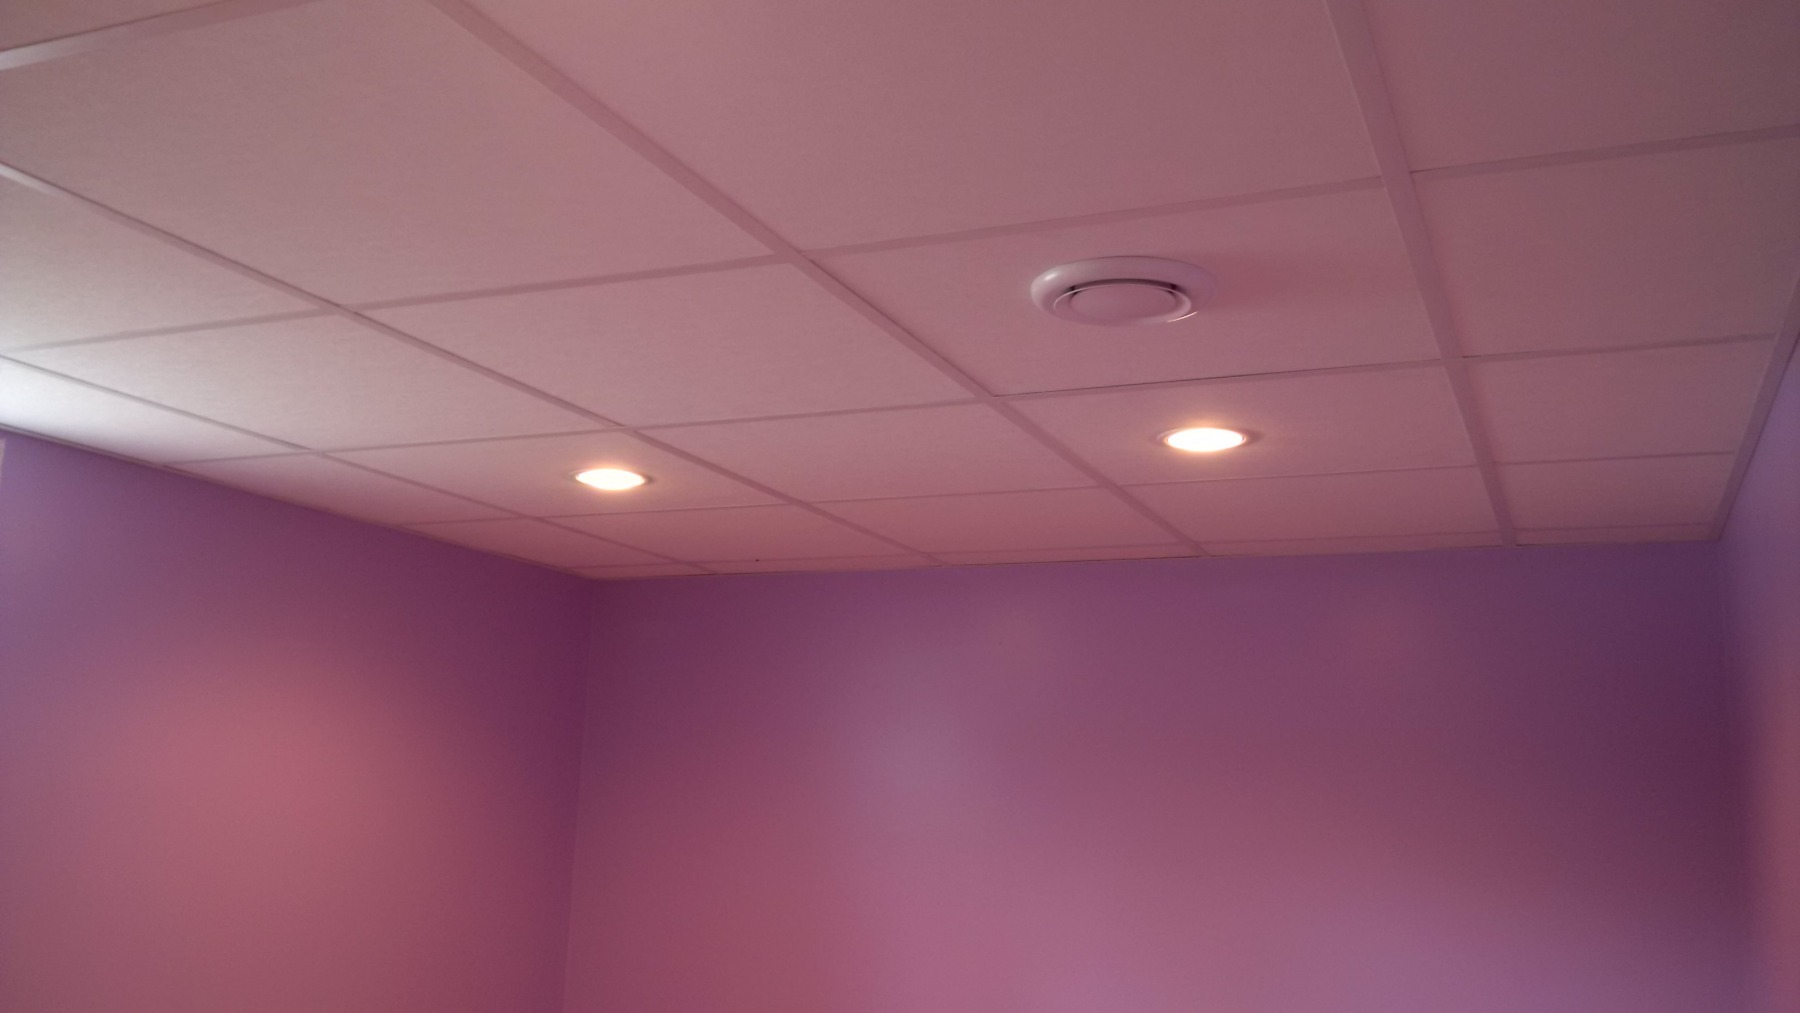 To Install Can Lights In A Drop Ceiling